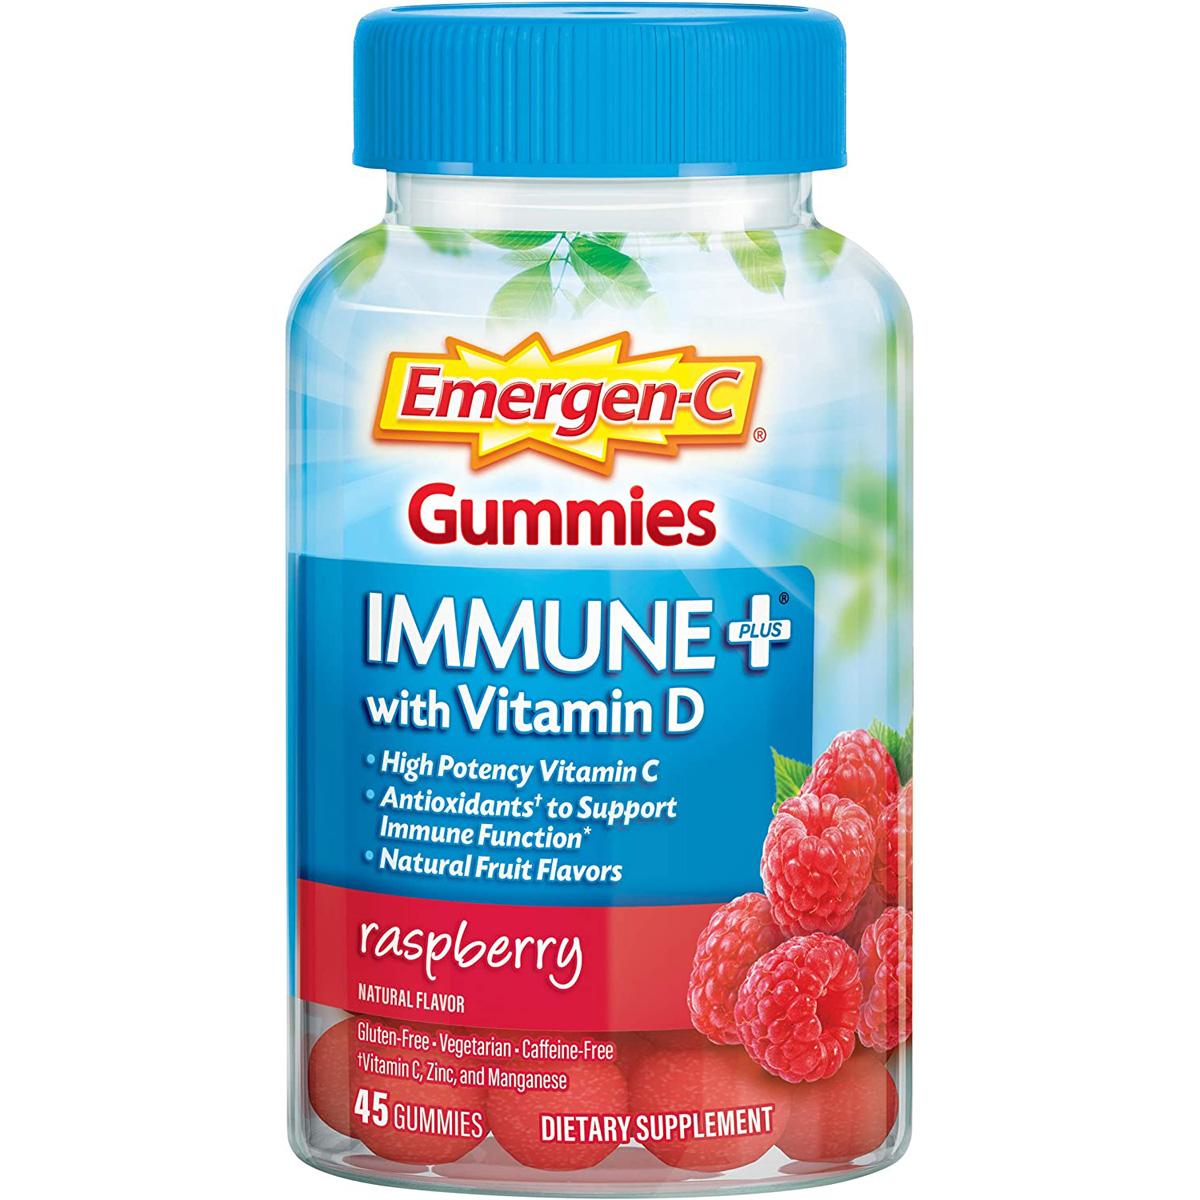 Emergen-C Immune+ Gummies with Vitamin D for $4.69 Shipped